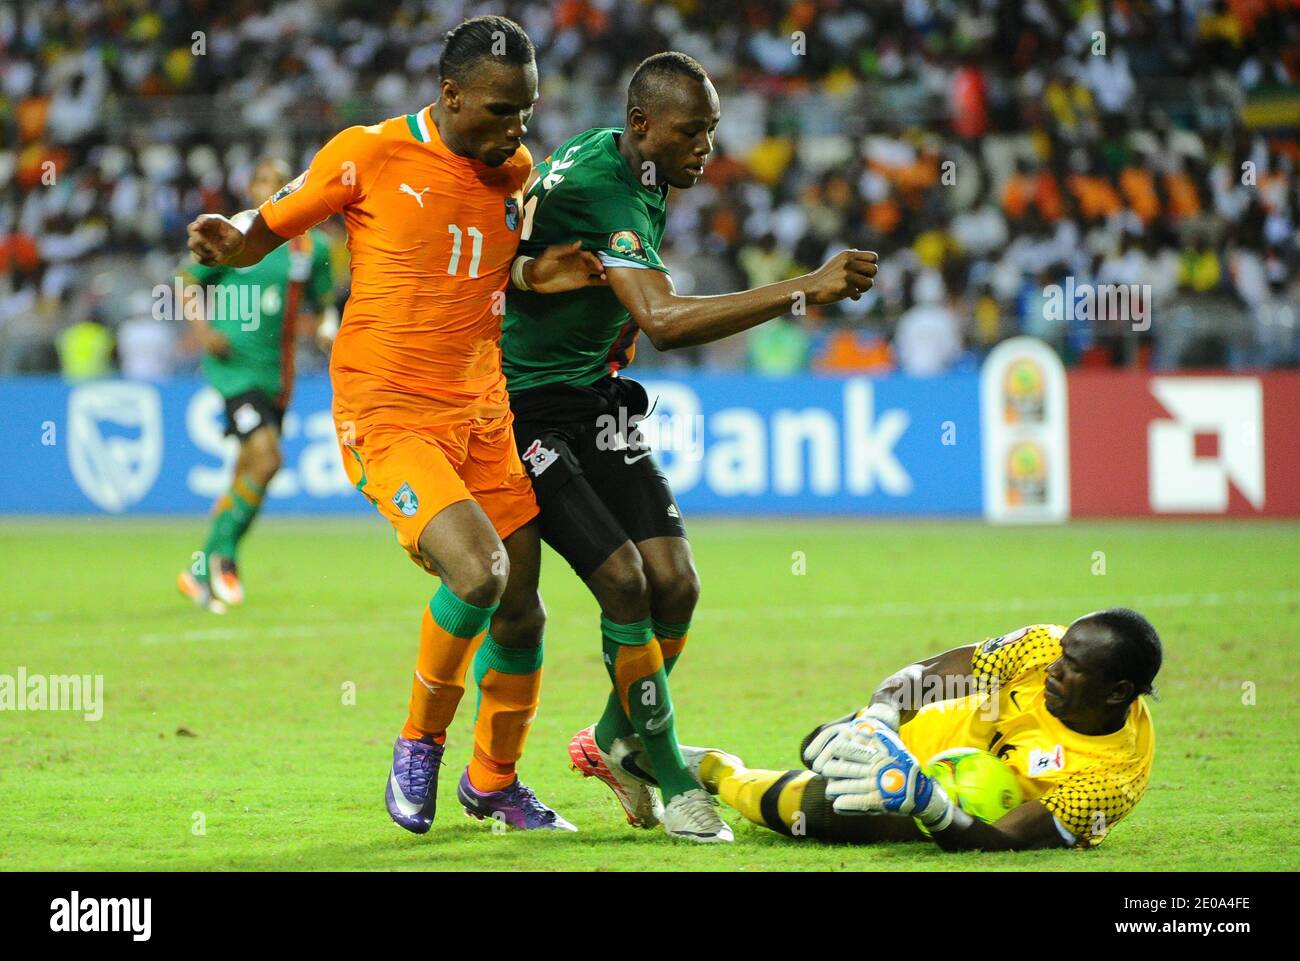 Ivory Coast's Didier Drogba and Zambia's Stophira Sunzu and Boubacar Barry during the 2012 African Cup of Nations Soccer Match, Final, Zambia Vs Ivory Coast in Libreville, Gabon on February 12, 2012. Photo by ABACAPRESS.COM Stock Photo